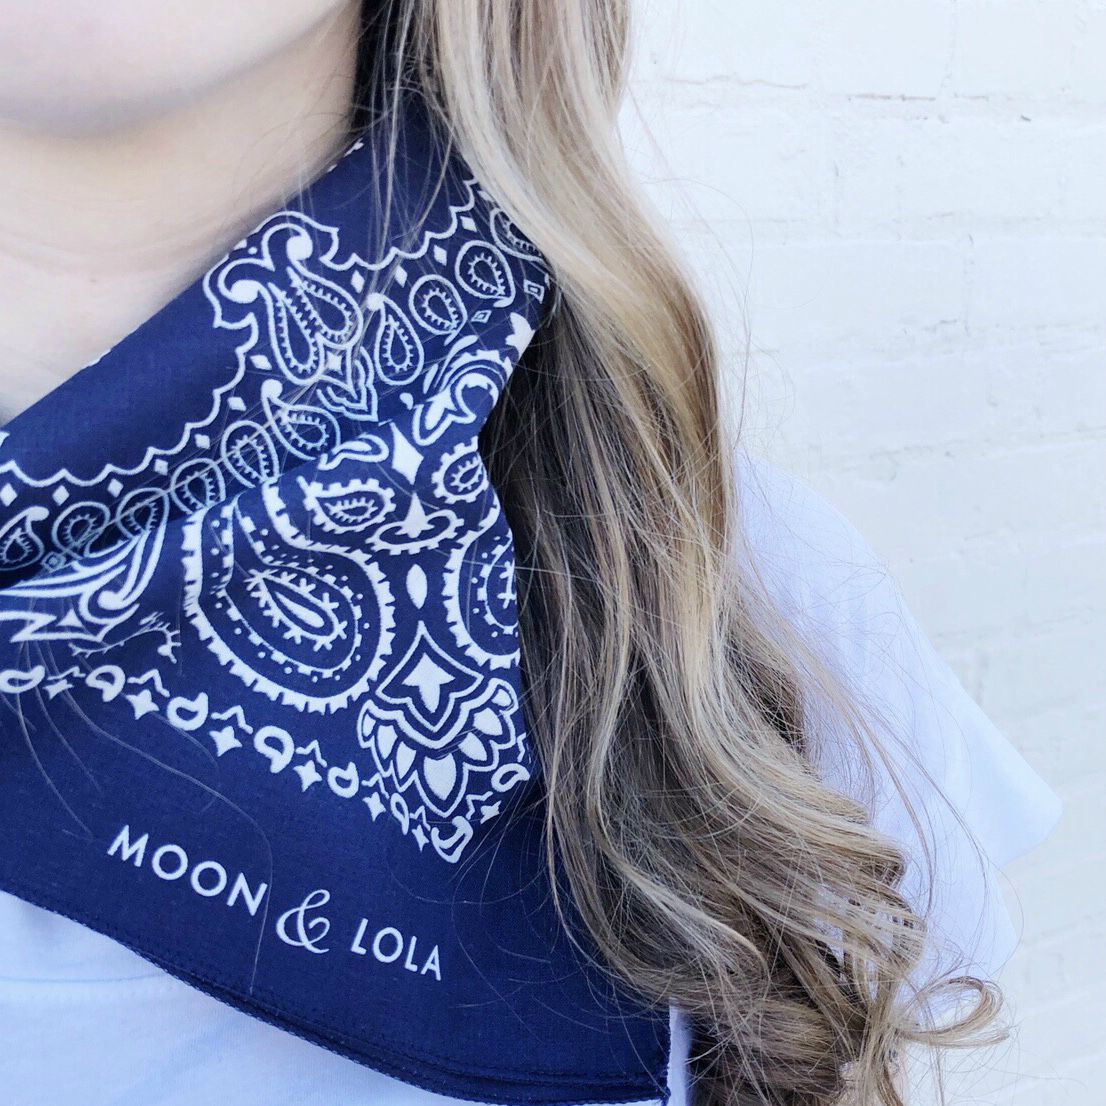 Moon and Lola - Traditional Bandana in Navy tied around neck as a kerchief